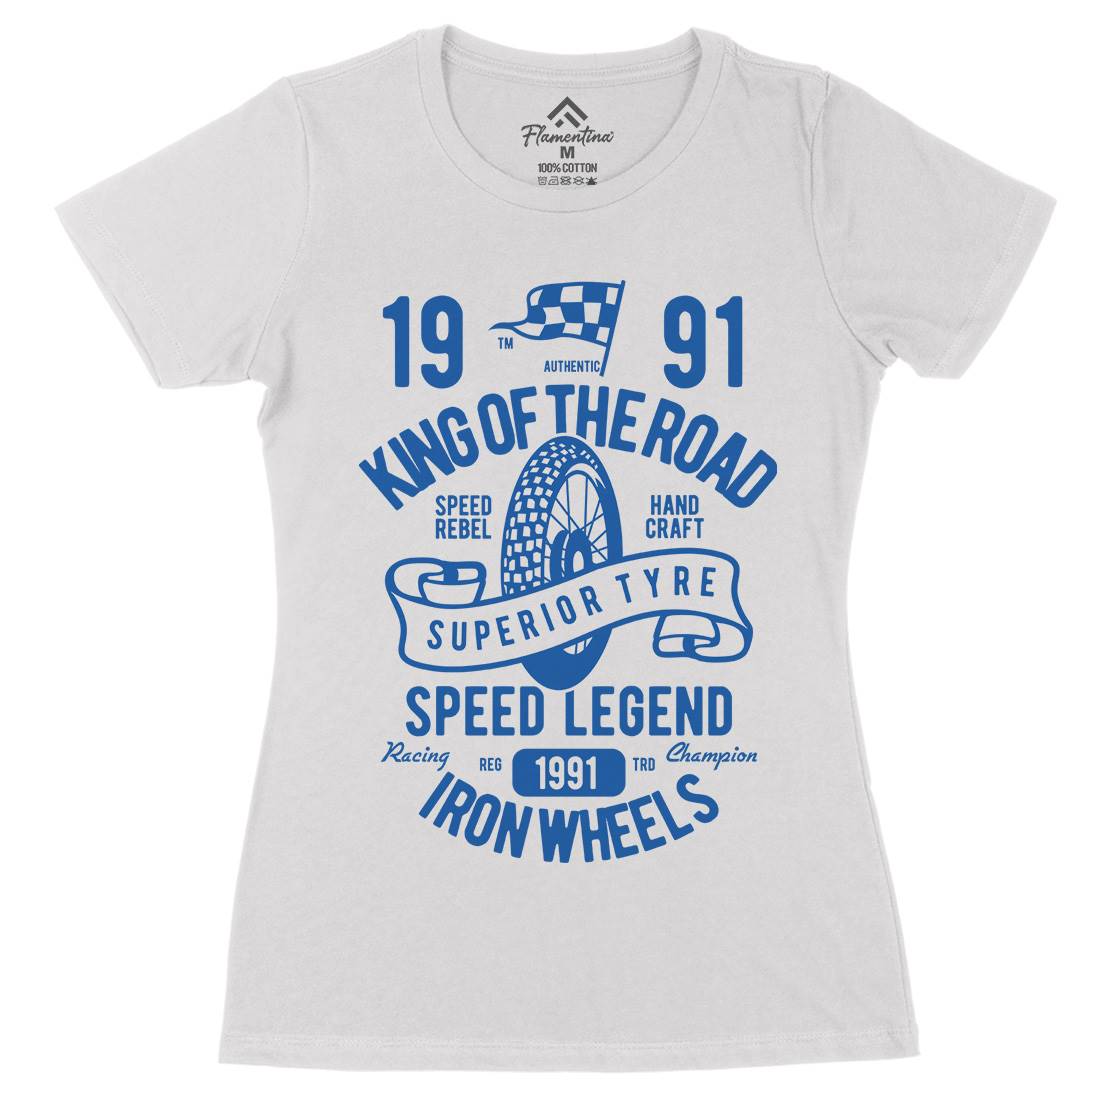 Superior Tyre King Of The Road Womens Organic Crew Neck T-Shirt Motorcycles B458